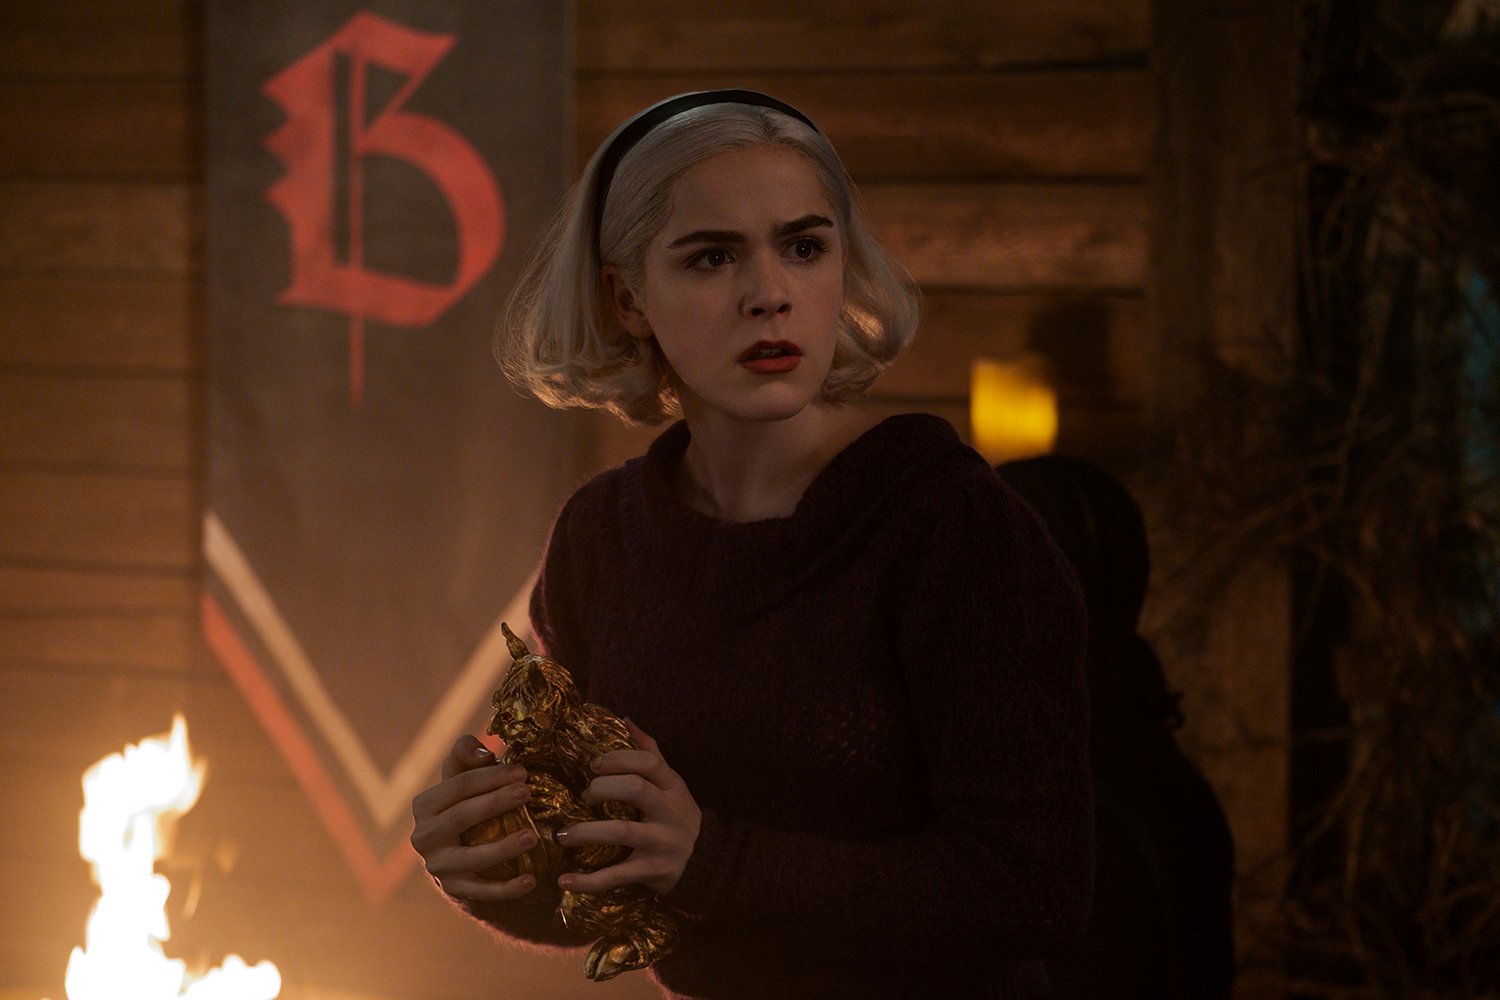 Kiernan Shipka as Sabrina Spellman in Chilling Adventures of Sabrina, years before she visits Riverdale alive and well.